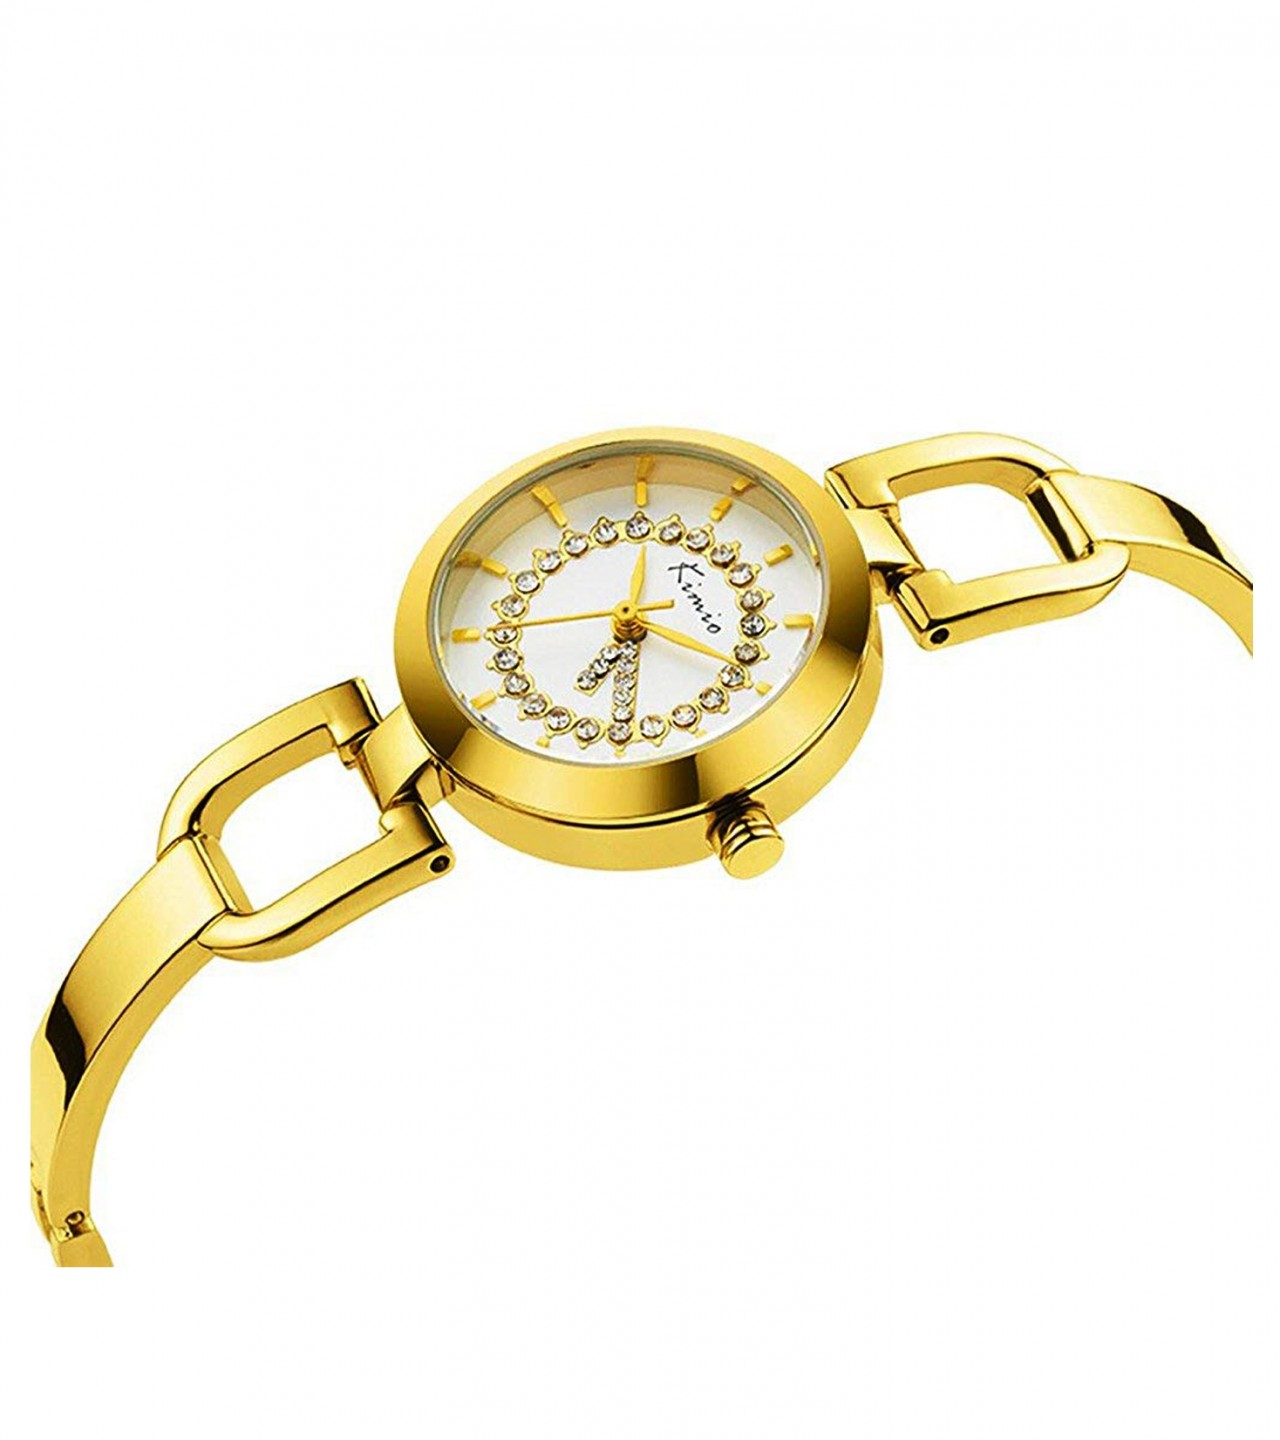 KC Kimio Stainless Steel Analog Watch For Women - Golden